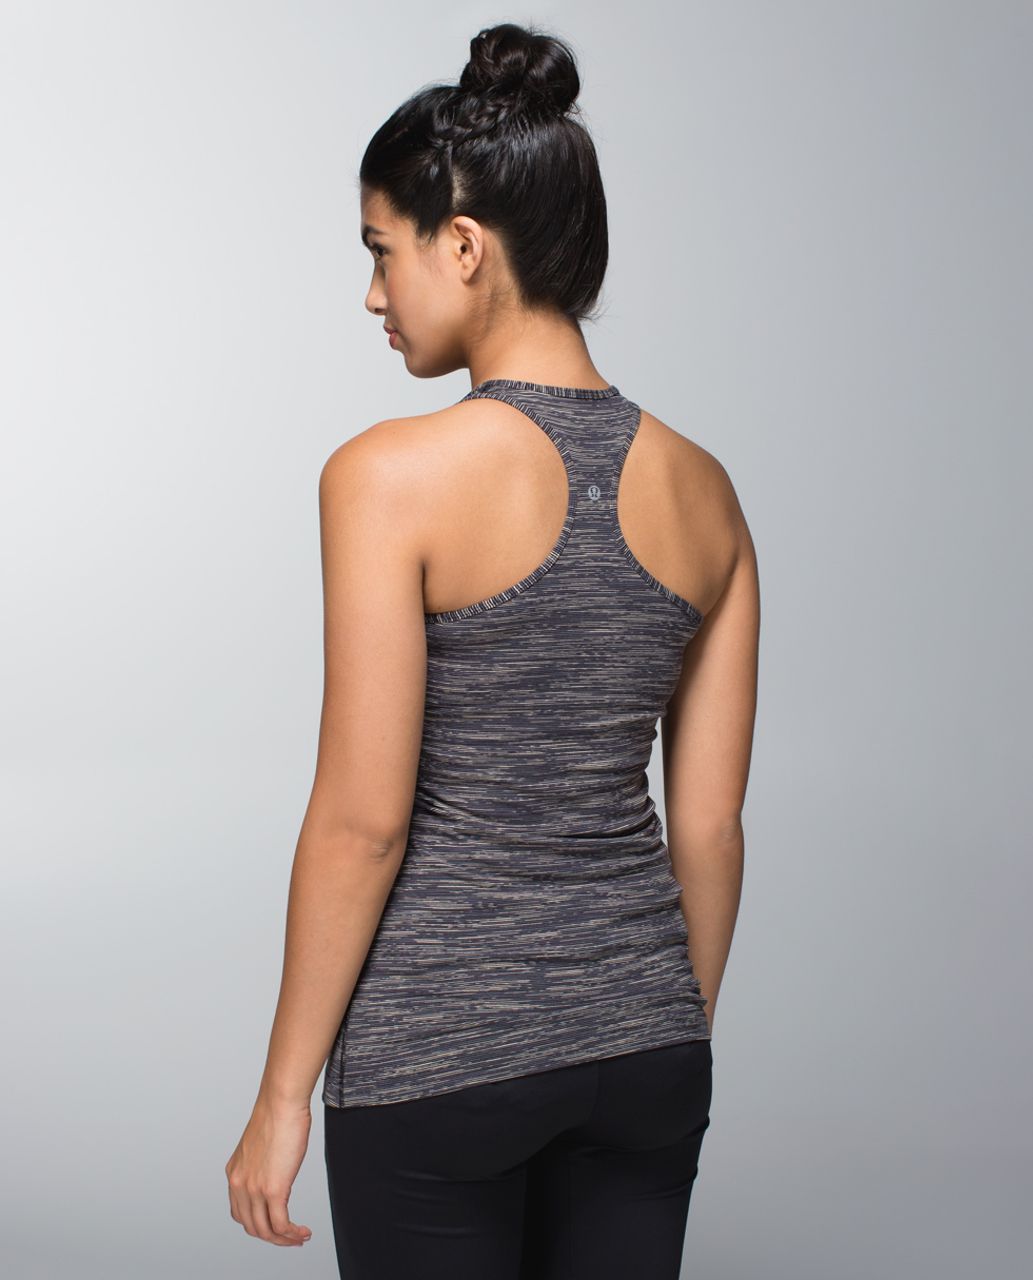 Lululemon Cool Racerback - Wee Are From Space Black Cashew